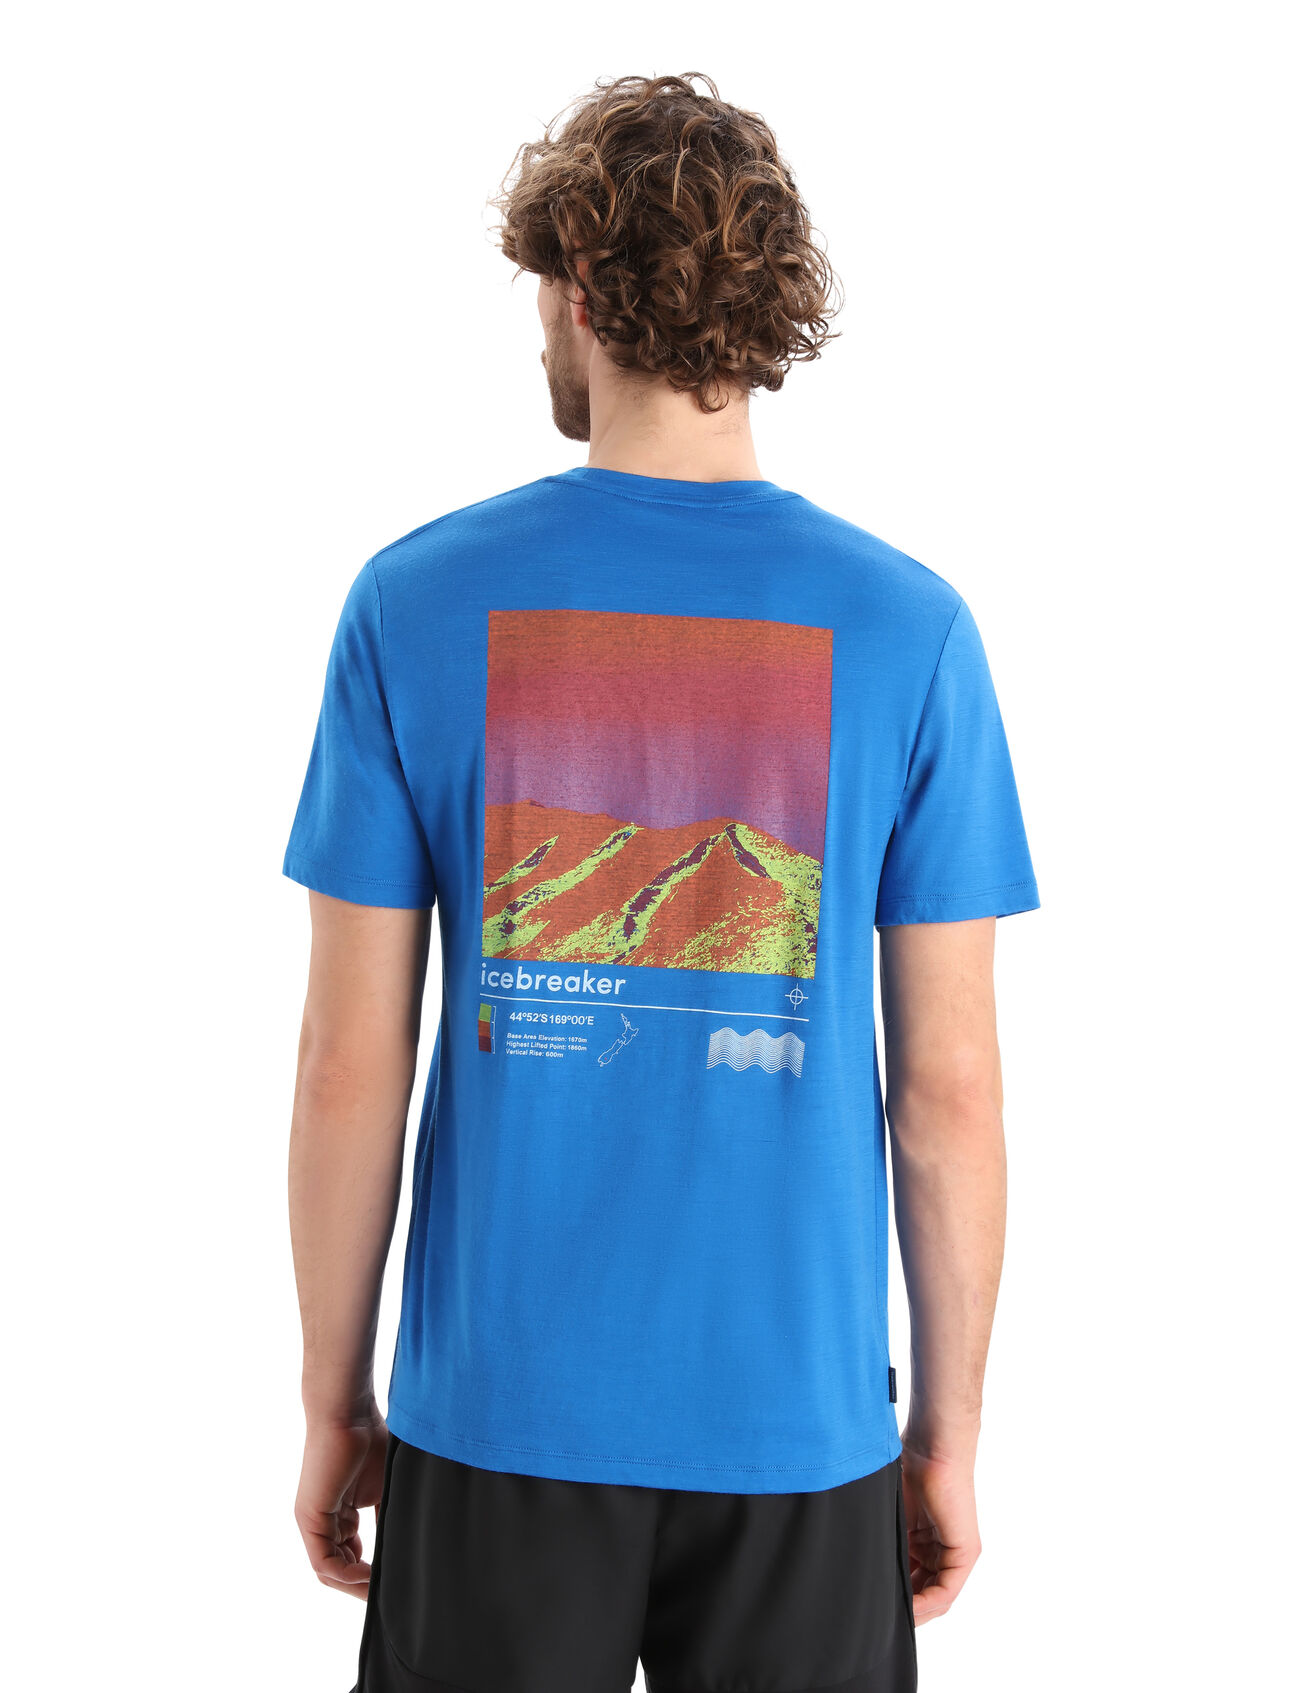 Mens Merino Tech Lite II Short Sleeve T-Shirt Alpine Zone Our versatile tech tee that provides comfort, breathability and natural odor-resistance for any adventure you can think of, the Tech Lite II Short Sleeve Tee Alpine Zone features 100% merino for all-natural performance. The tee’s original graphic artwork draws inspiration from the Cardrona Mountains of New Zealand.